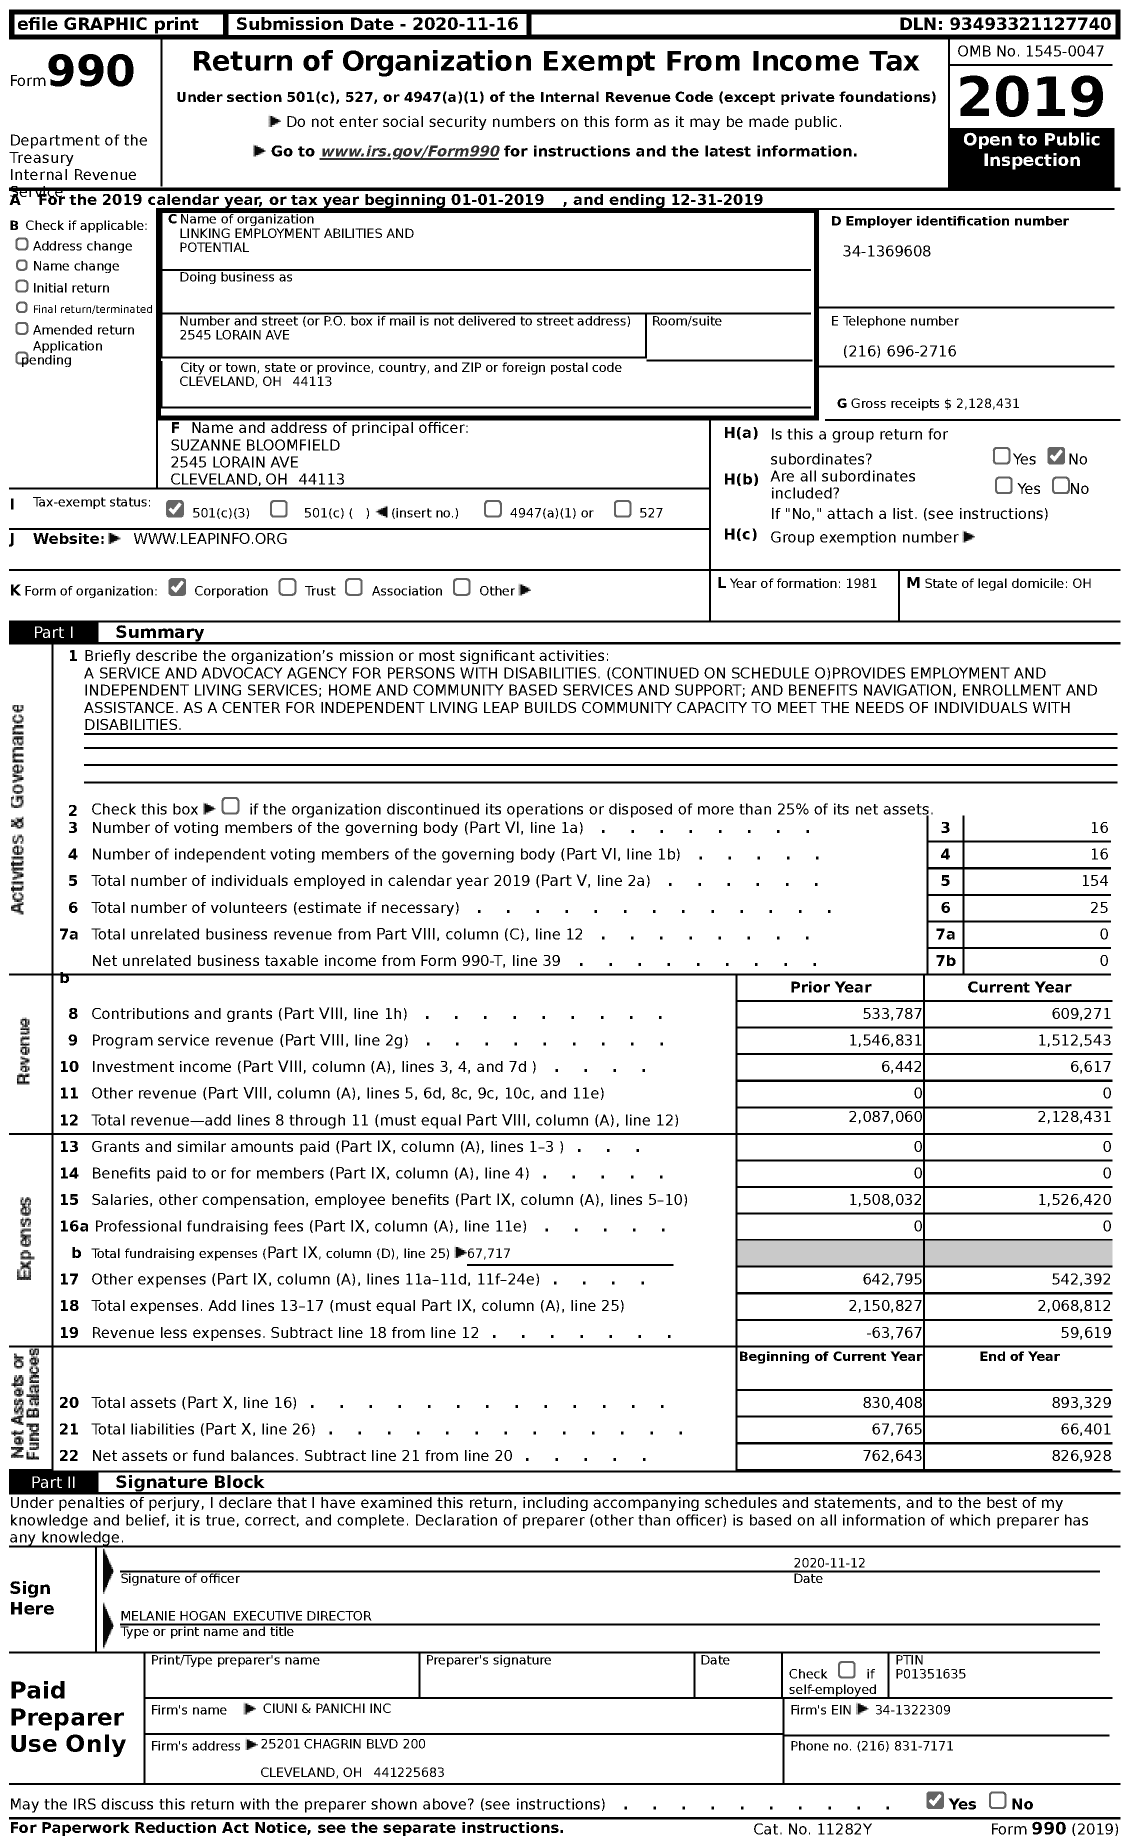 Image of first page of 2019 Form 990 for Linking Employment Abilities and Potential